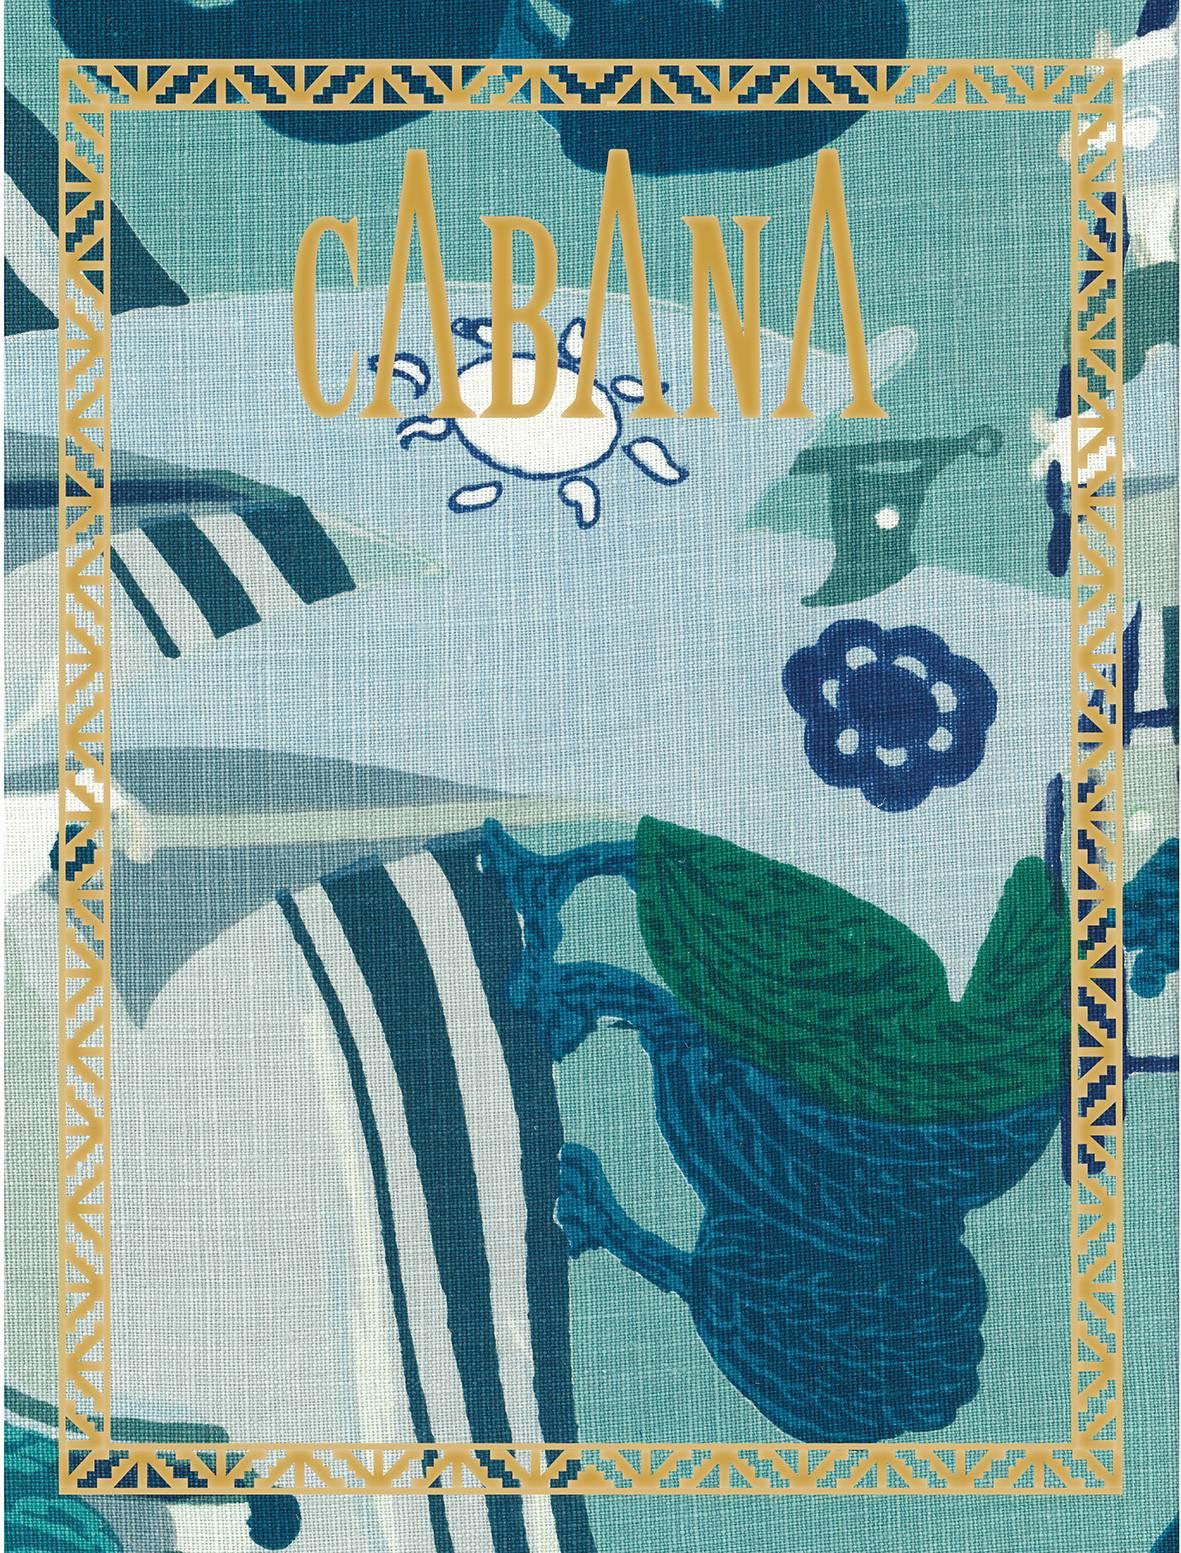 Cabana Magazine Issue 6, in Collaboration with Schumacher For Sale 1